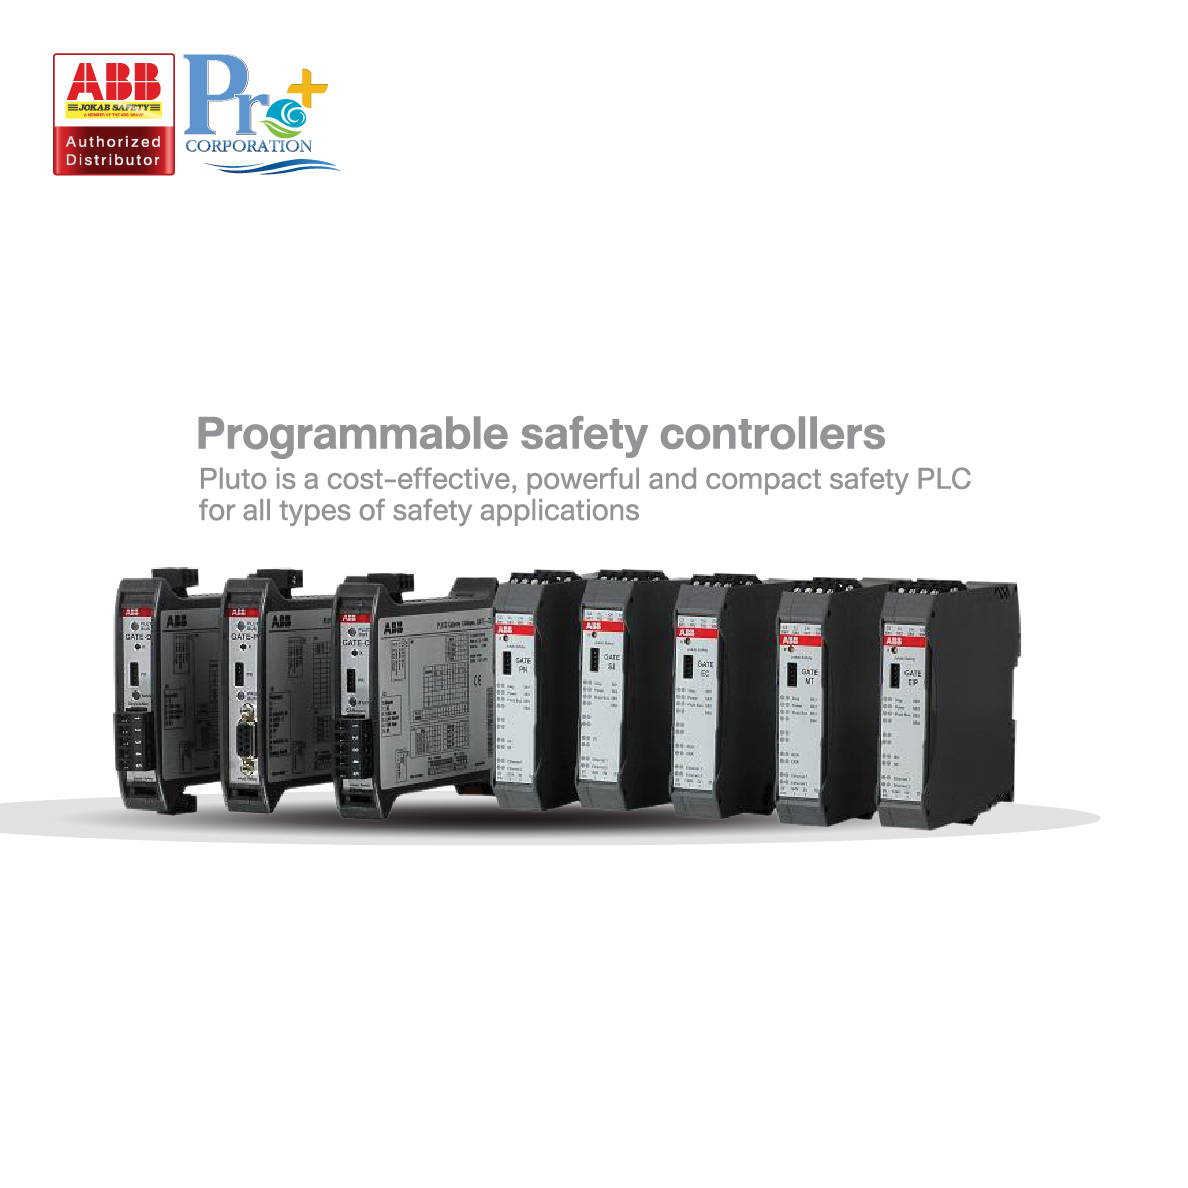 Programmable safety controllers